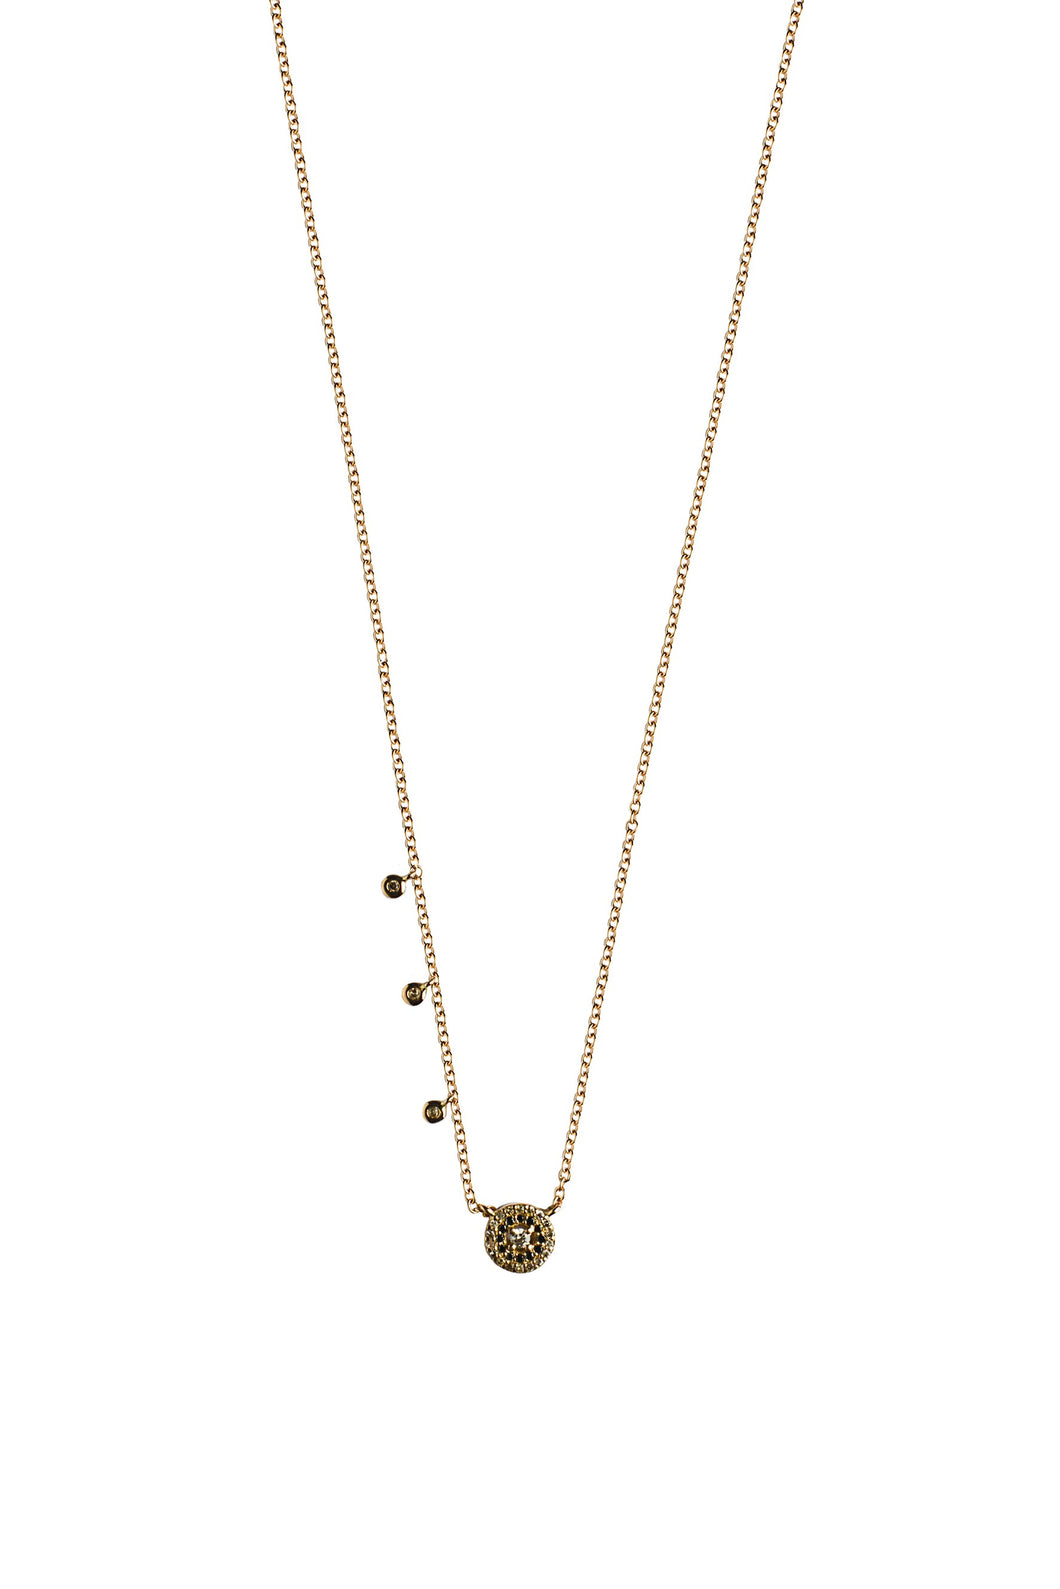 Mini round eye necklace - rose gold chain